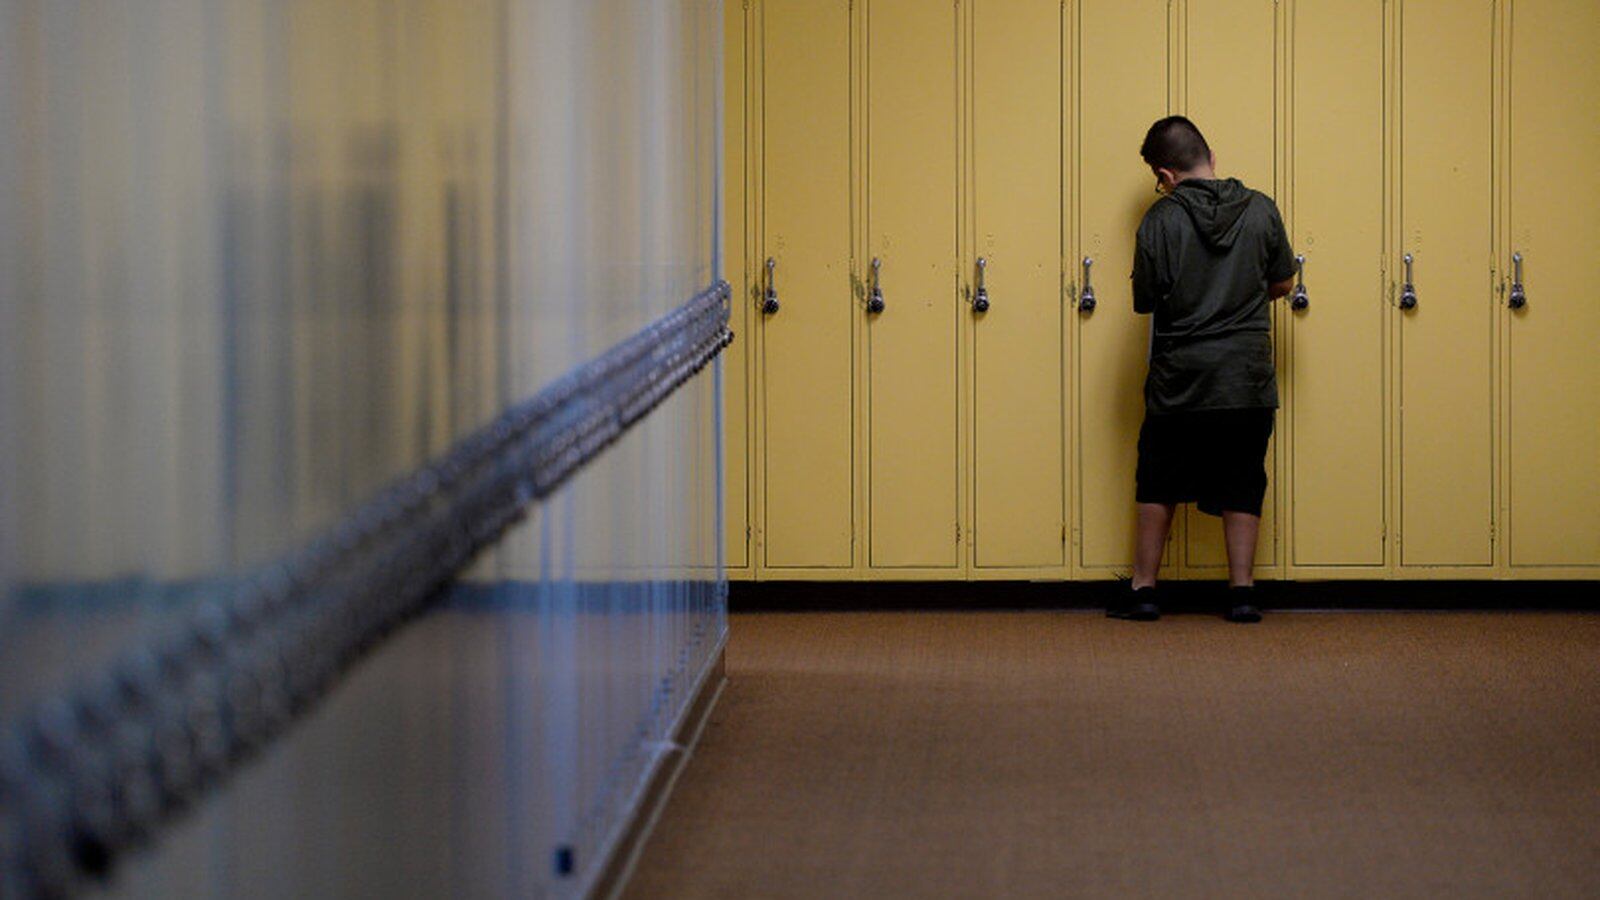 A wide hallway ends in a bank of yellow lockers. A boy who looks about 11 or 12, with short hair and a black T-shirt and shorts, is seen from behind. He’s opening one of the lockers. He’s alone.